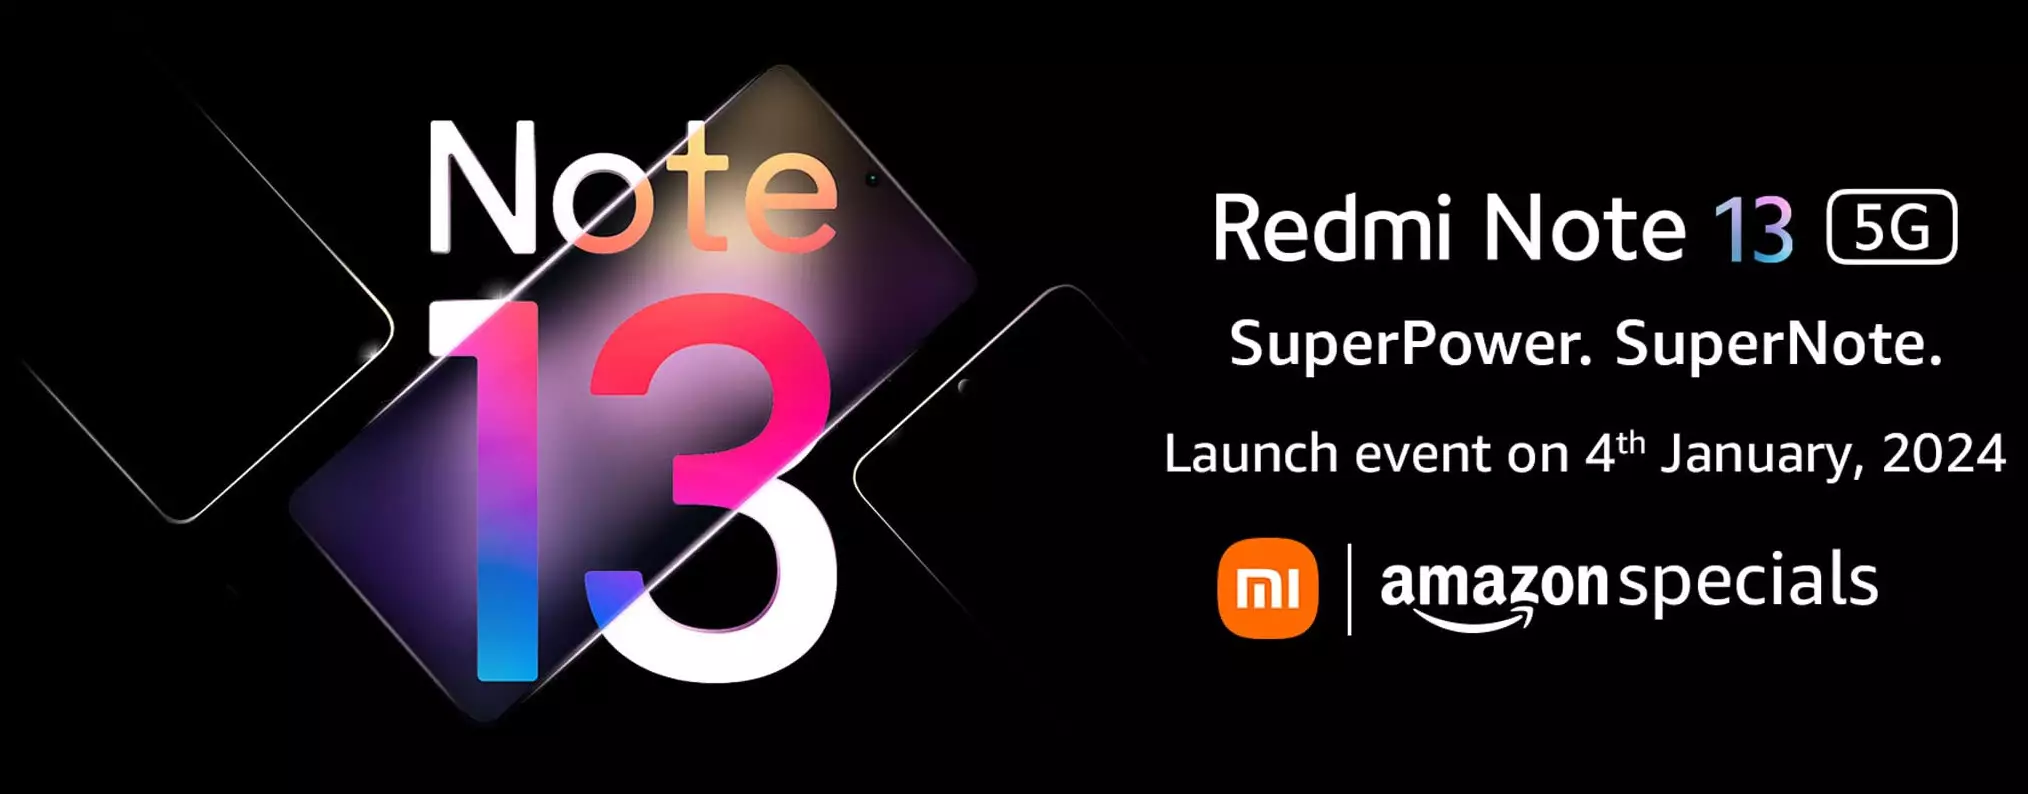 Redmi Note: Xiaomi confirms the launch of Redmi Note 13 Classic 5G on  January 4 next year - Times of India